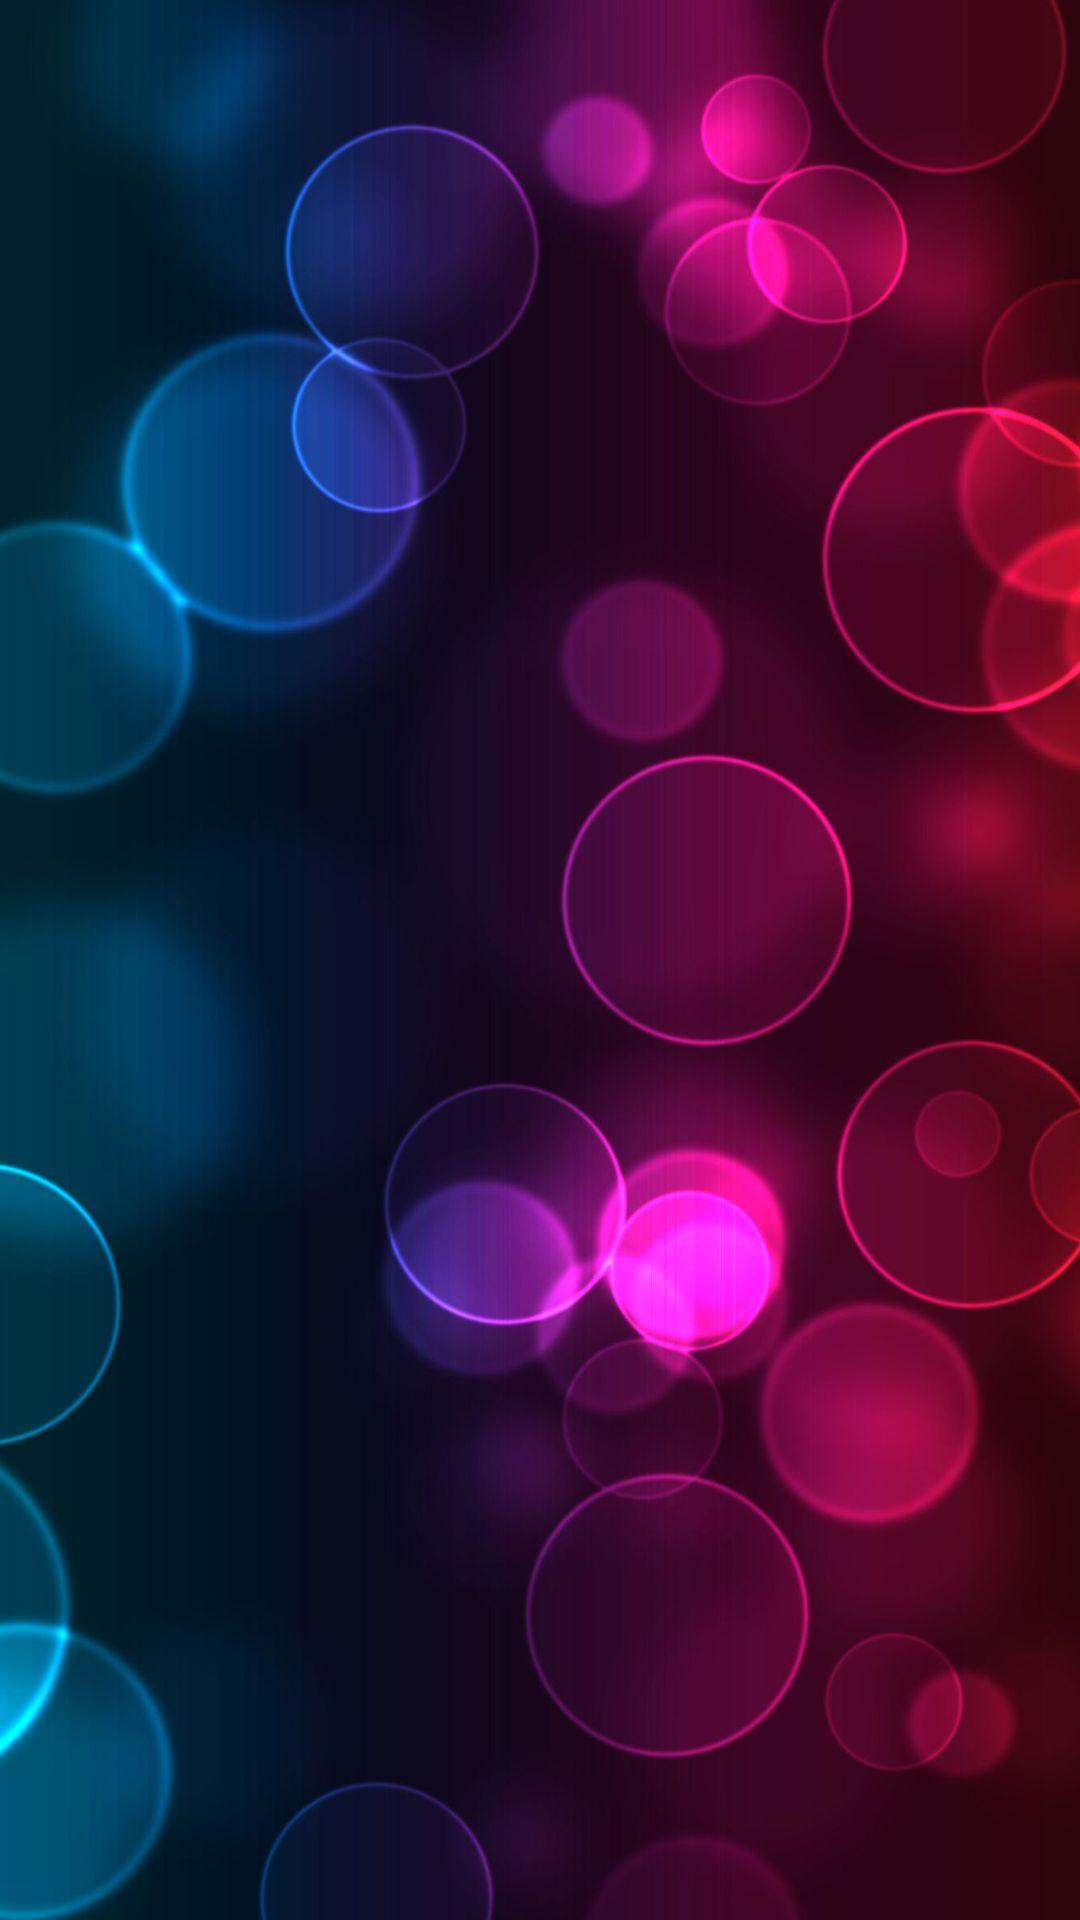 Abstract Full HD Smartphone Wallpaper